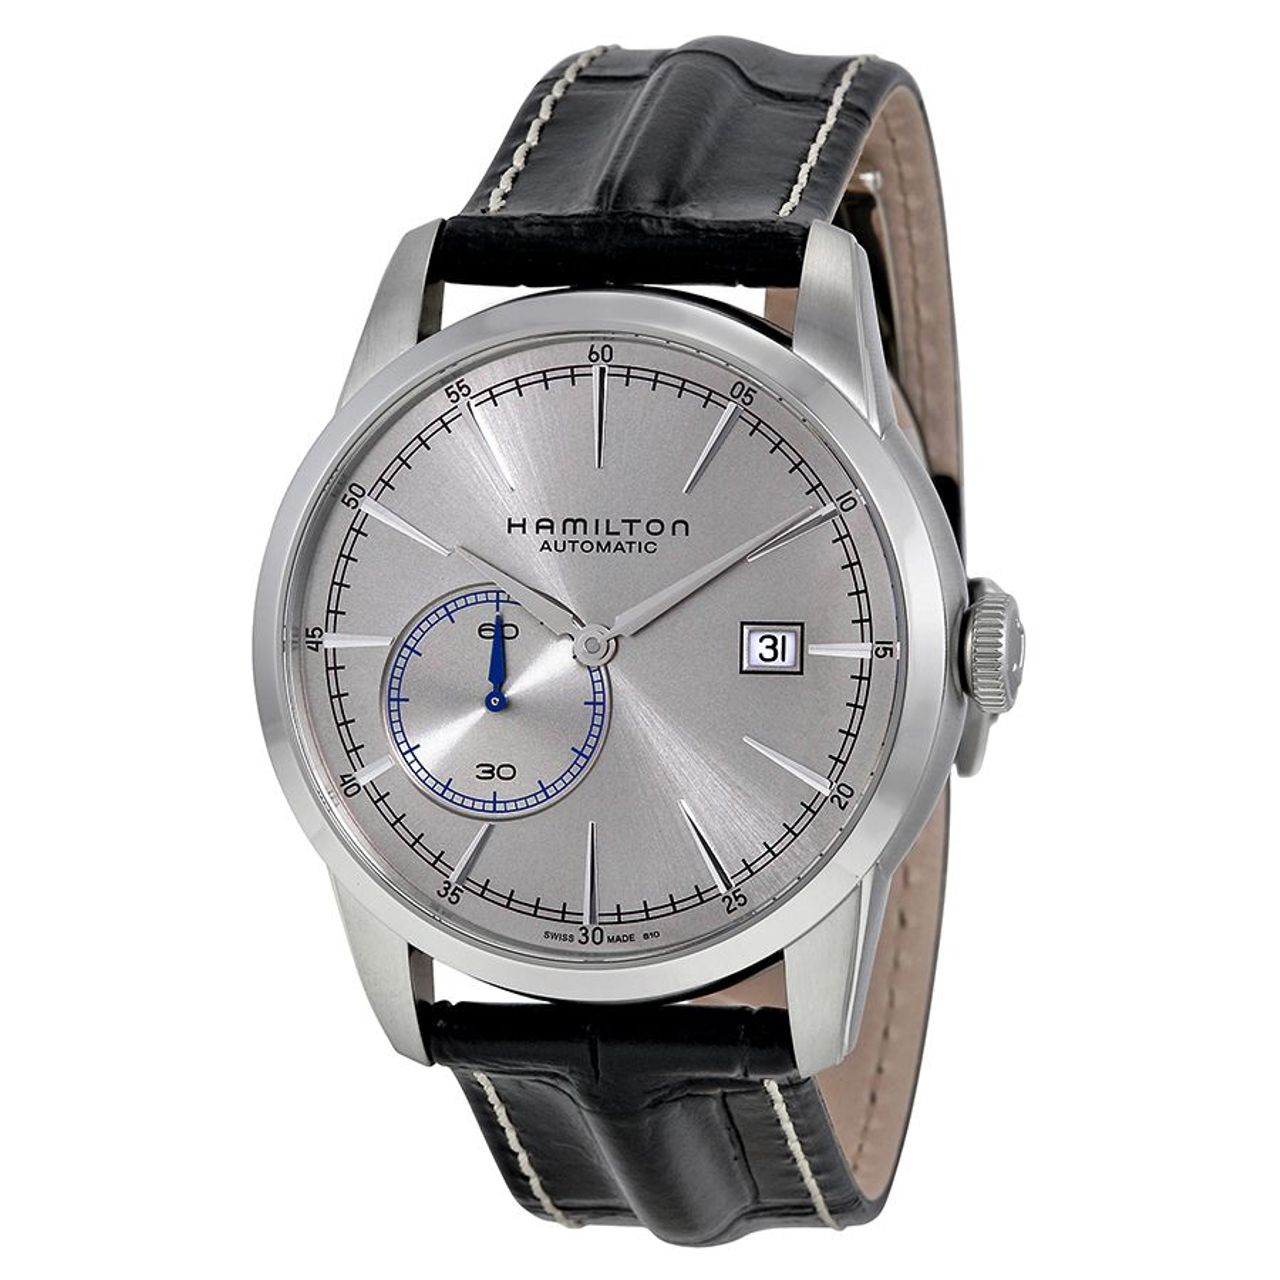 Hamilton H40515781 Mens Silver Dial Analog Automatic Watch with Leather Strap